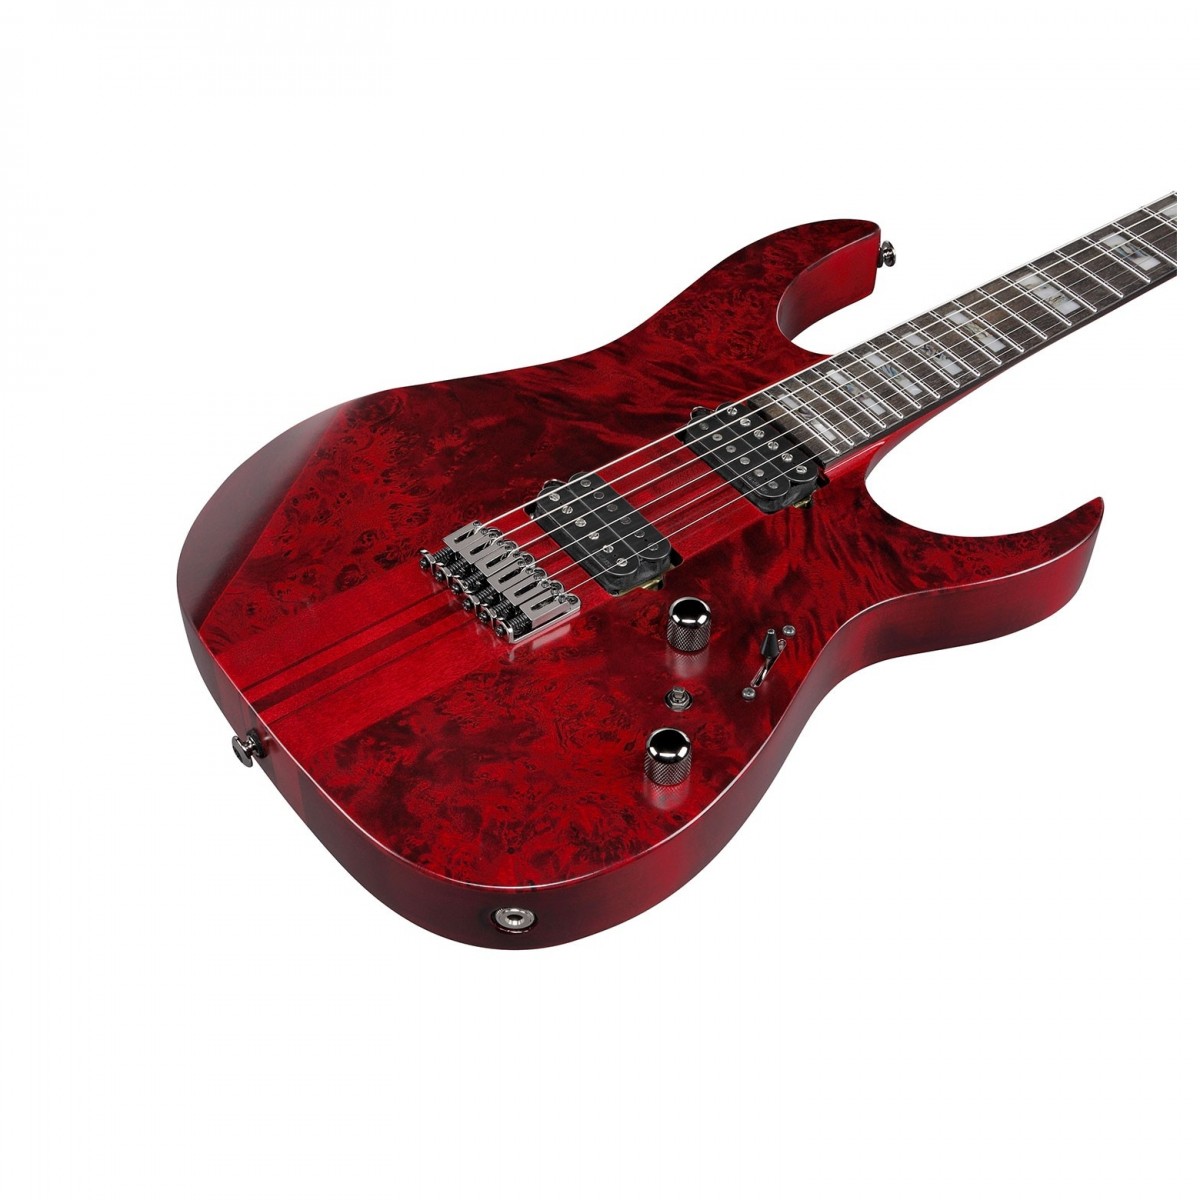 Ibanez Rgt1221pb Swl Premium 2h Dimarzio Ht Eb - Stained Wine Red Low Gloss - E-Gitarre in Str-Form - Variation 2